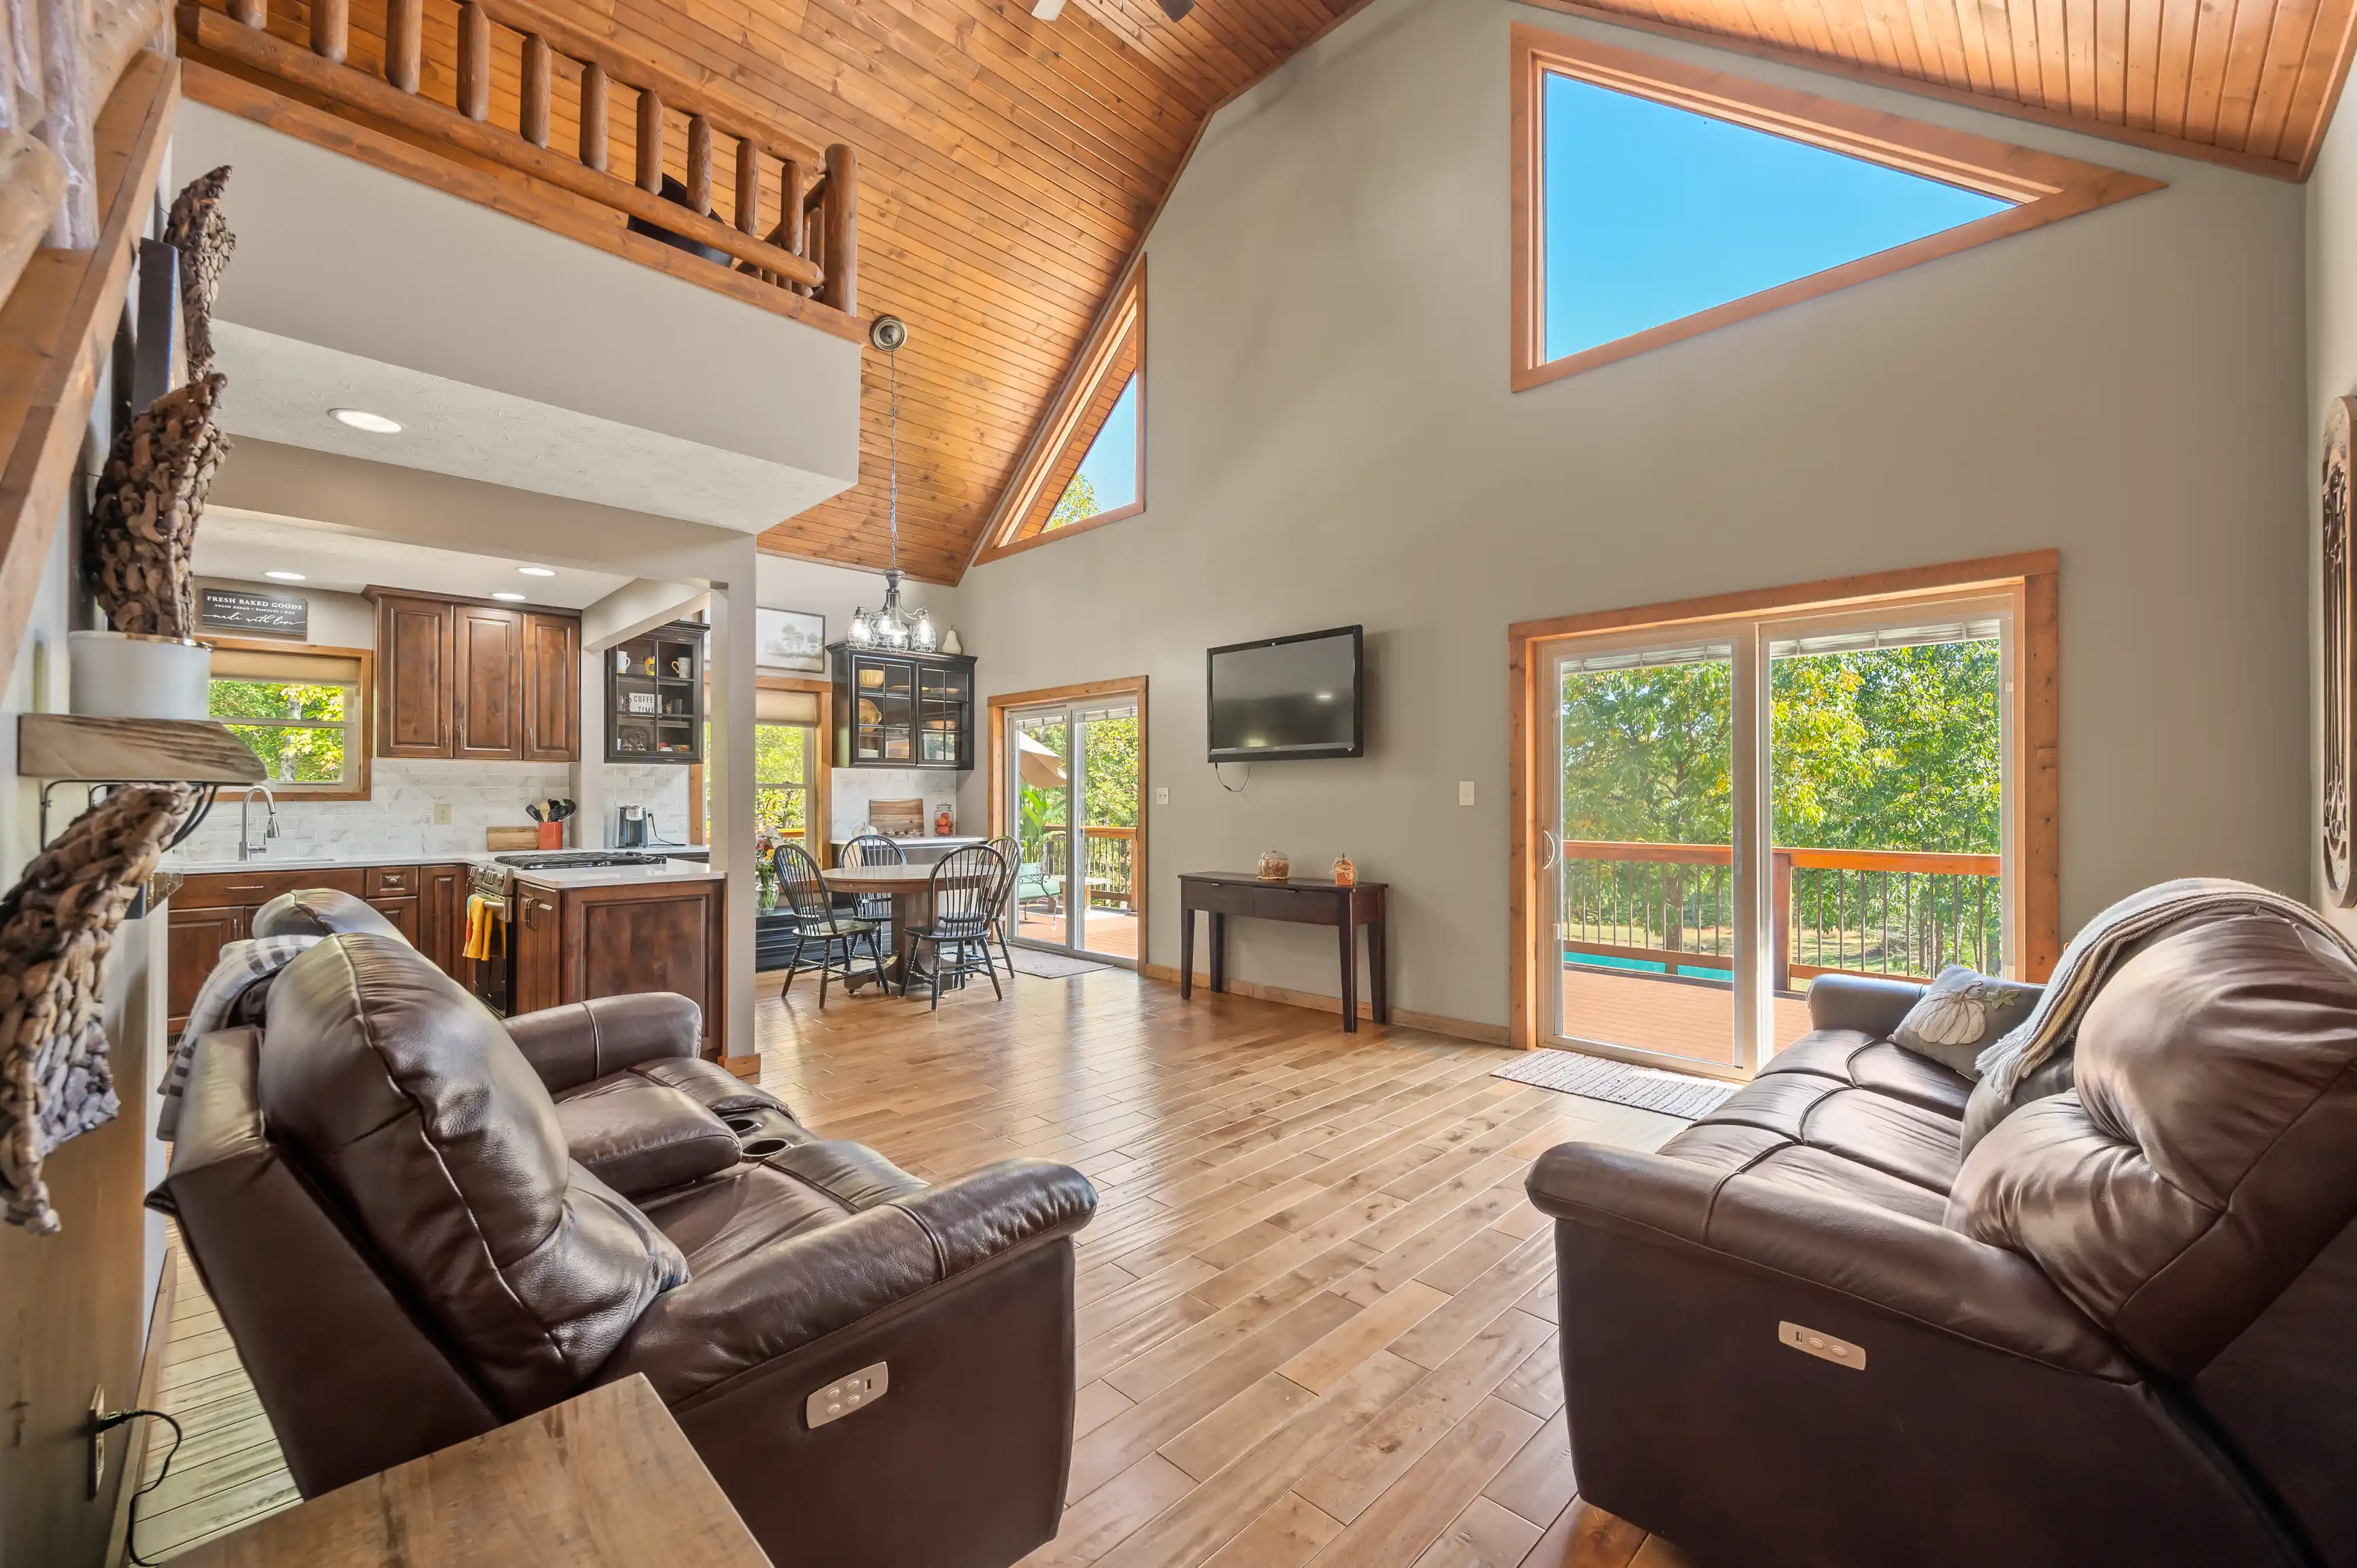 Spacious living room with high ceilings, wooden floors, and a loft, featuring leather sofas, a mounted TV, and sliding doors leading to a balcony with forest views.